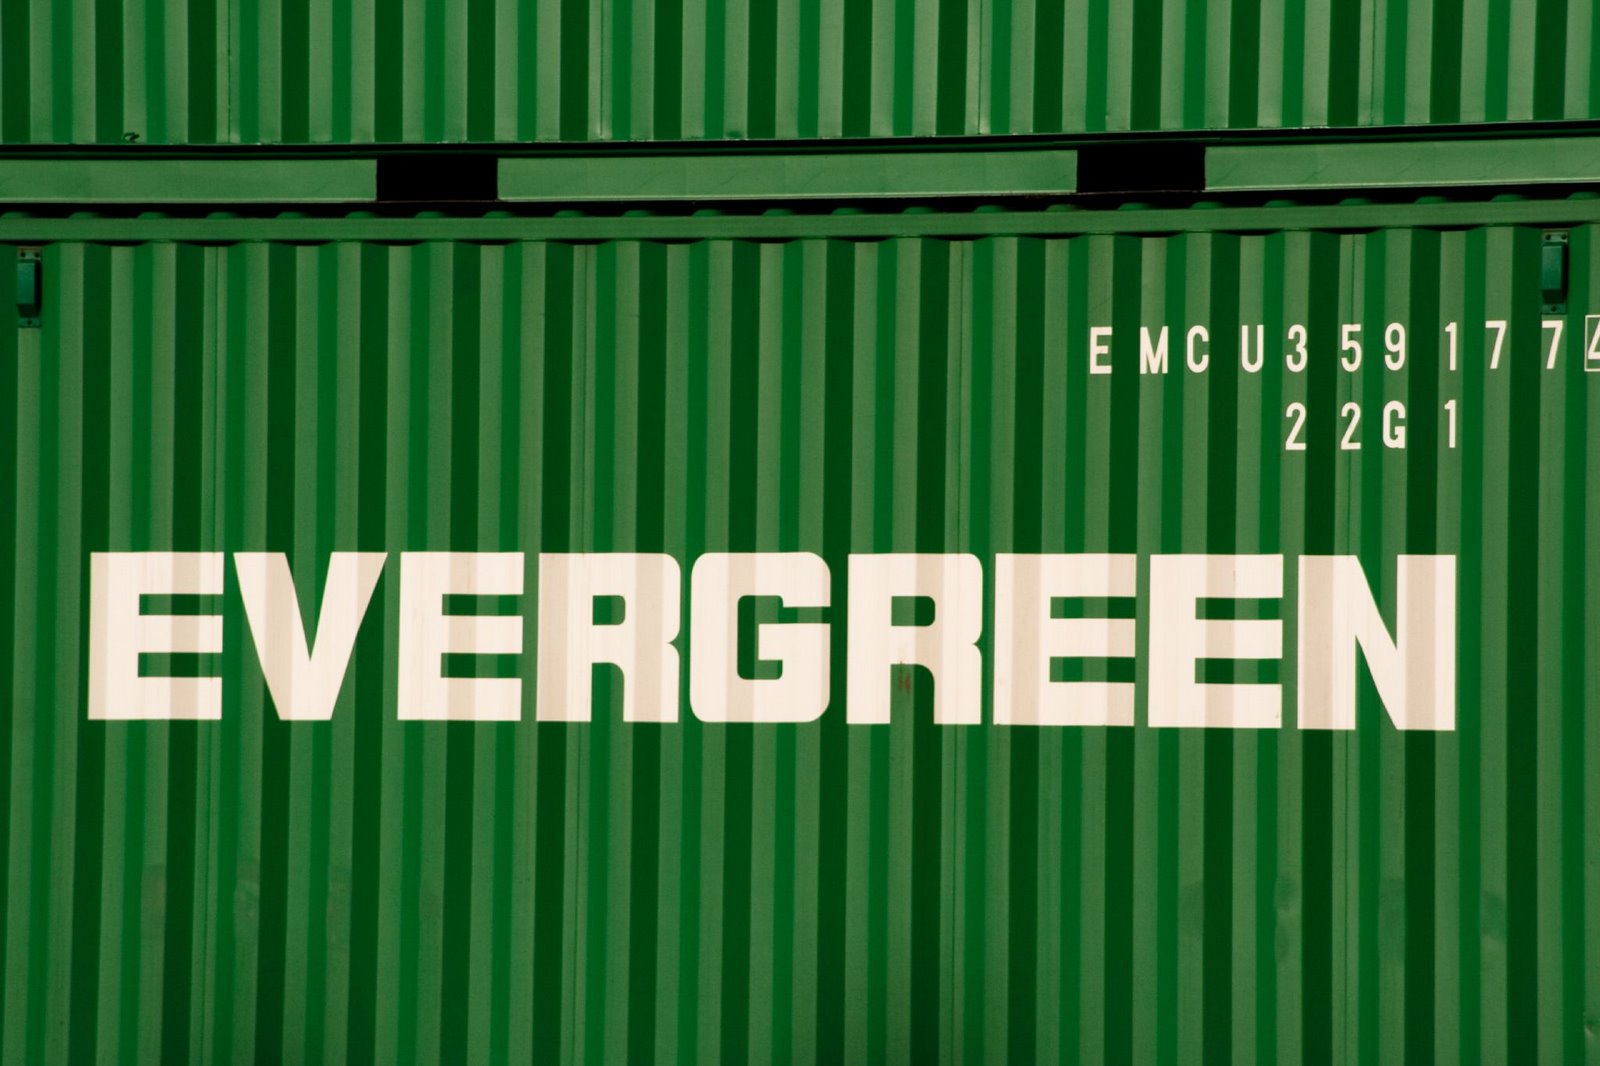 [Evergreen_shipping_container.jpg]